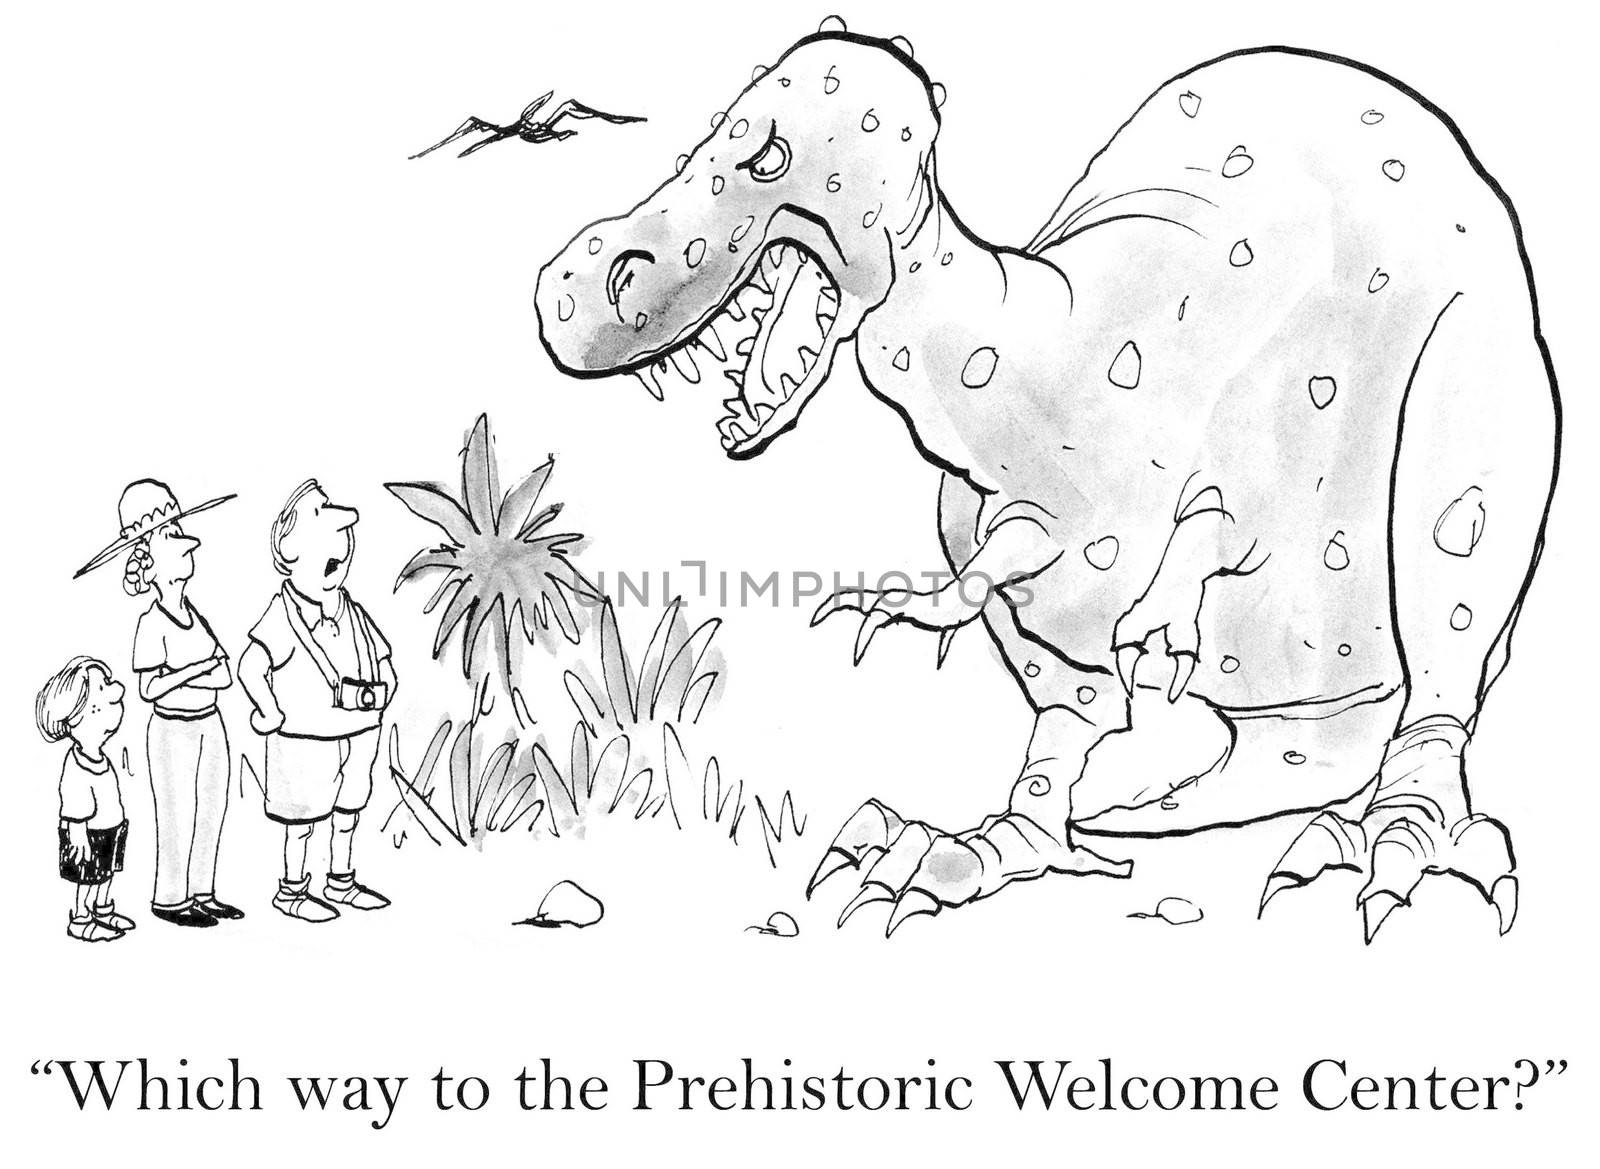 "Which way to the Prehistoric Welcome Center?"